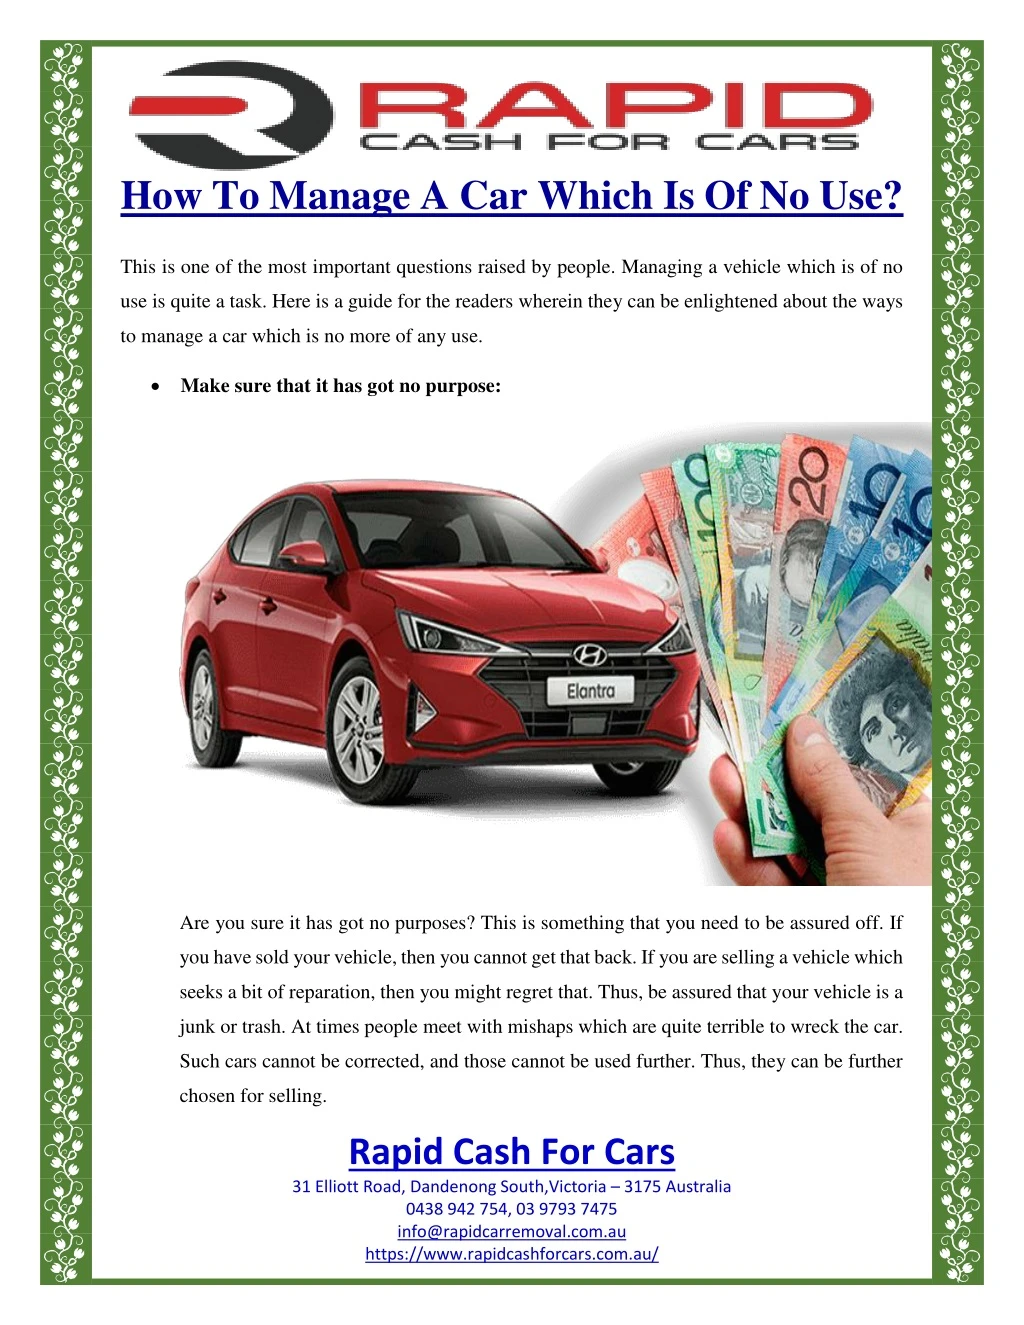 how to manage a car which is of no use